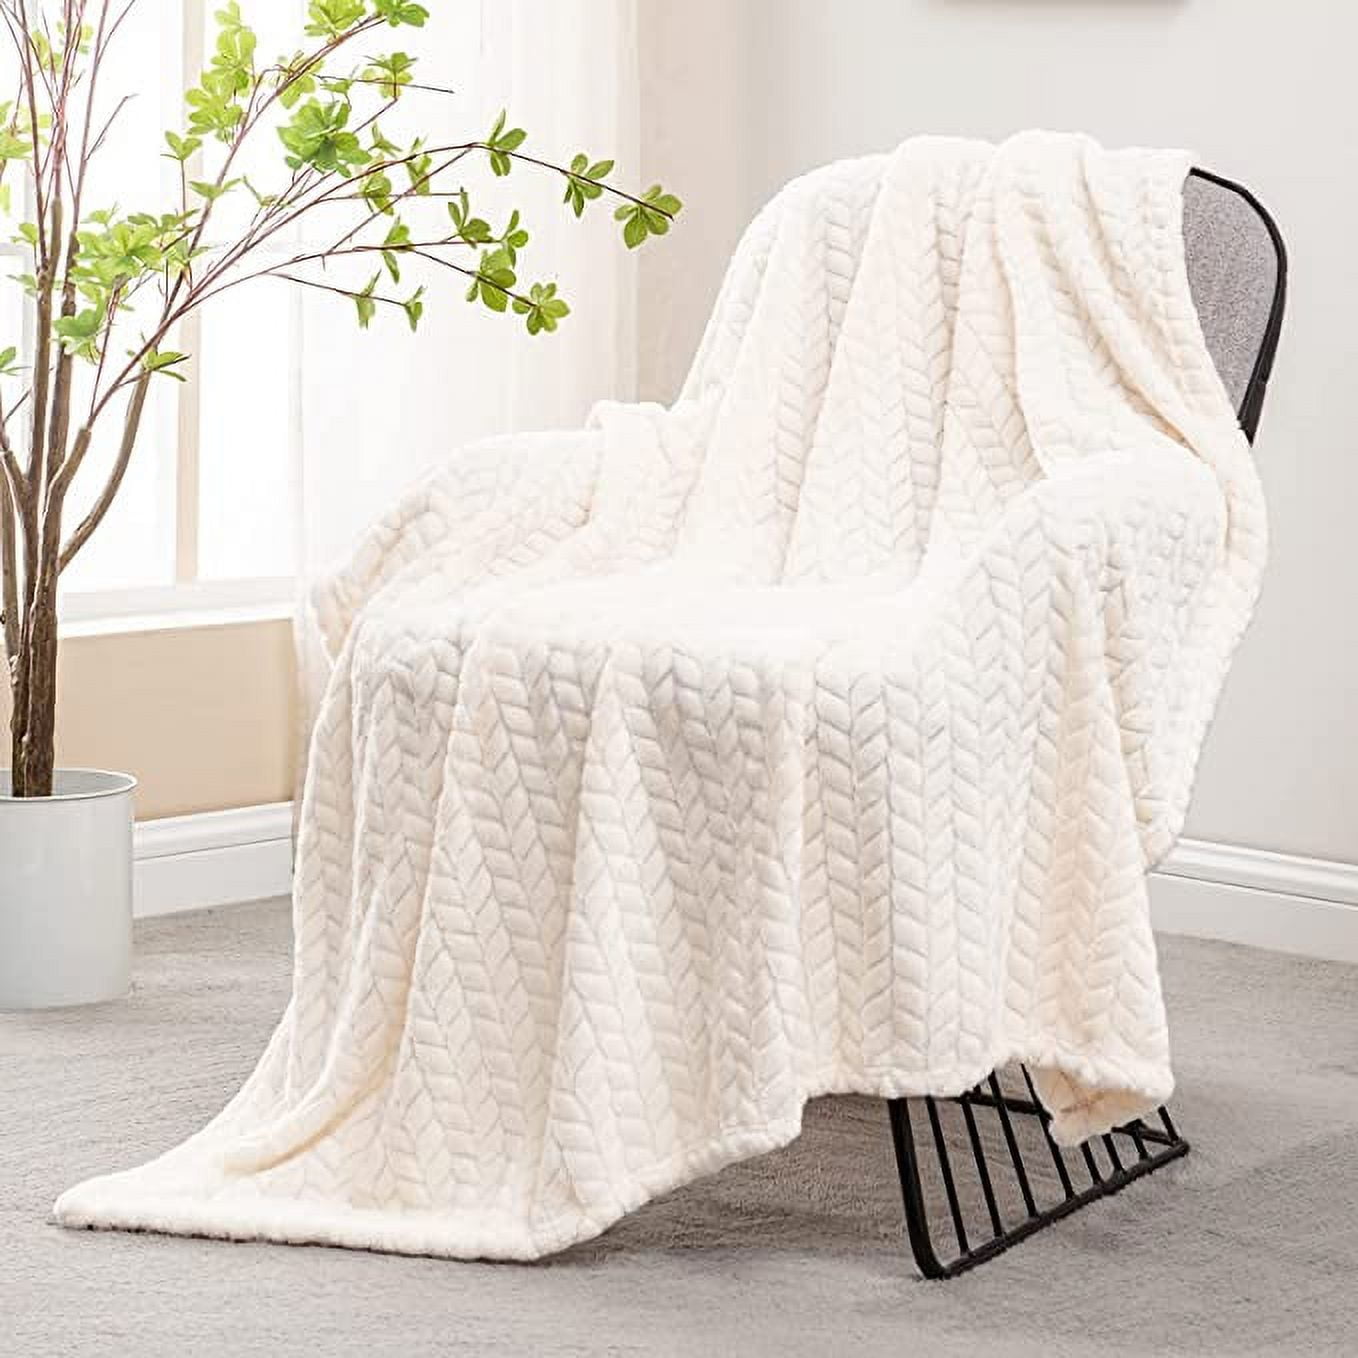 JUNZAI Blankets and Throws, Blankets Thick Blanket Wool Thickened Blanket  Large Roving Yarn Knitted Blanket Winter Warm Blanket Sofa Bed Blanket  Fuzzy